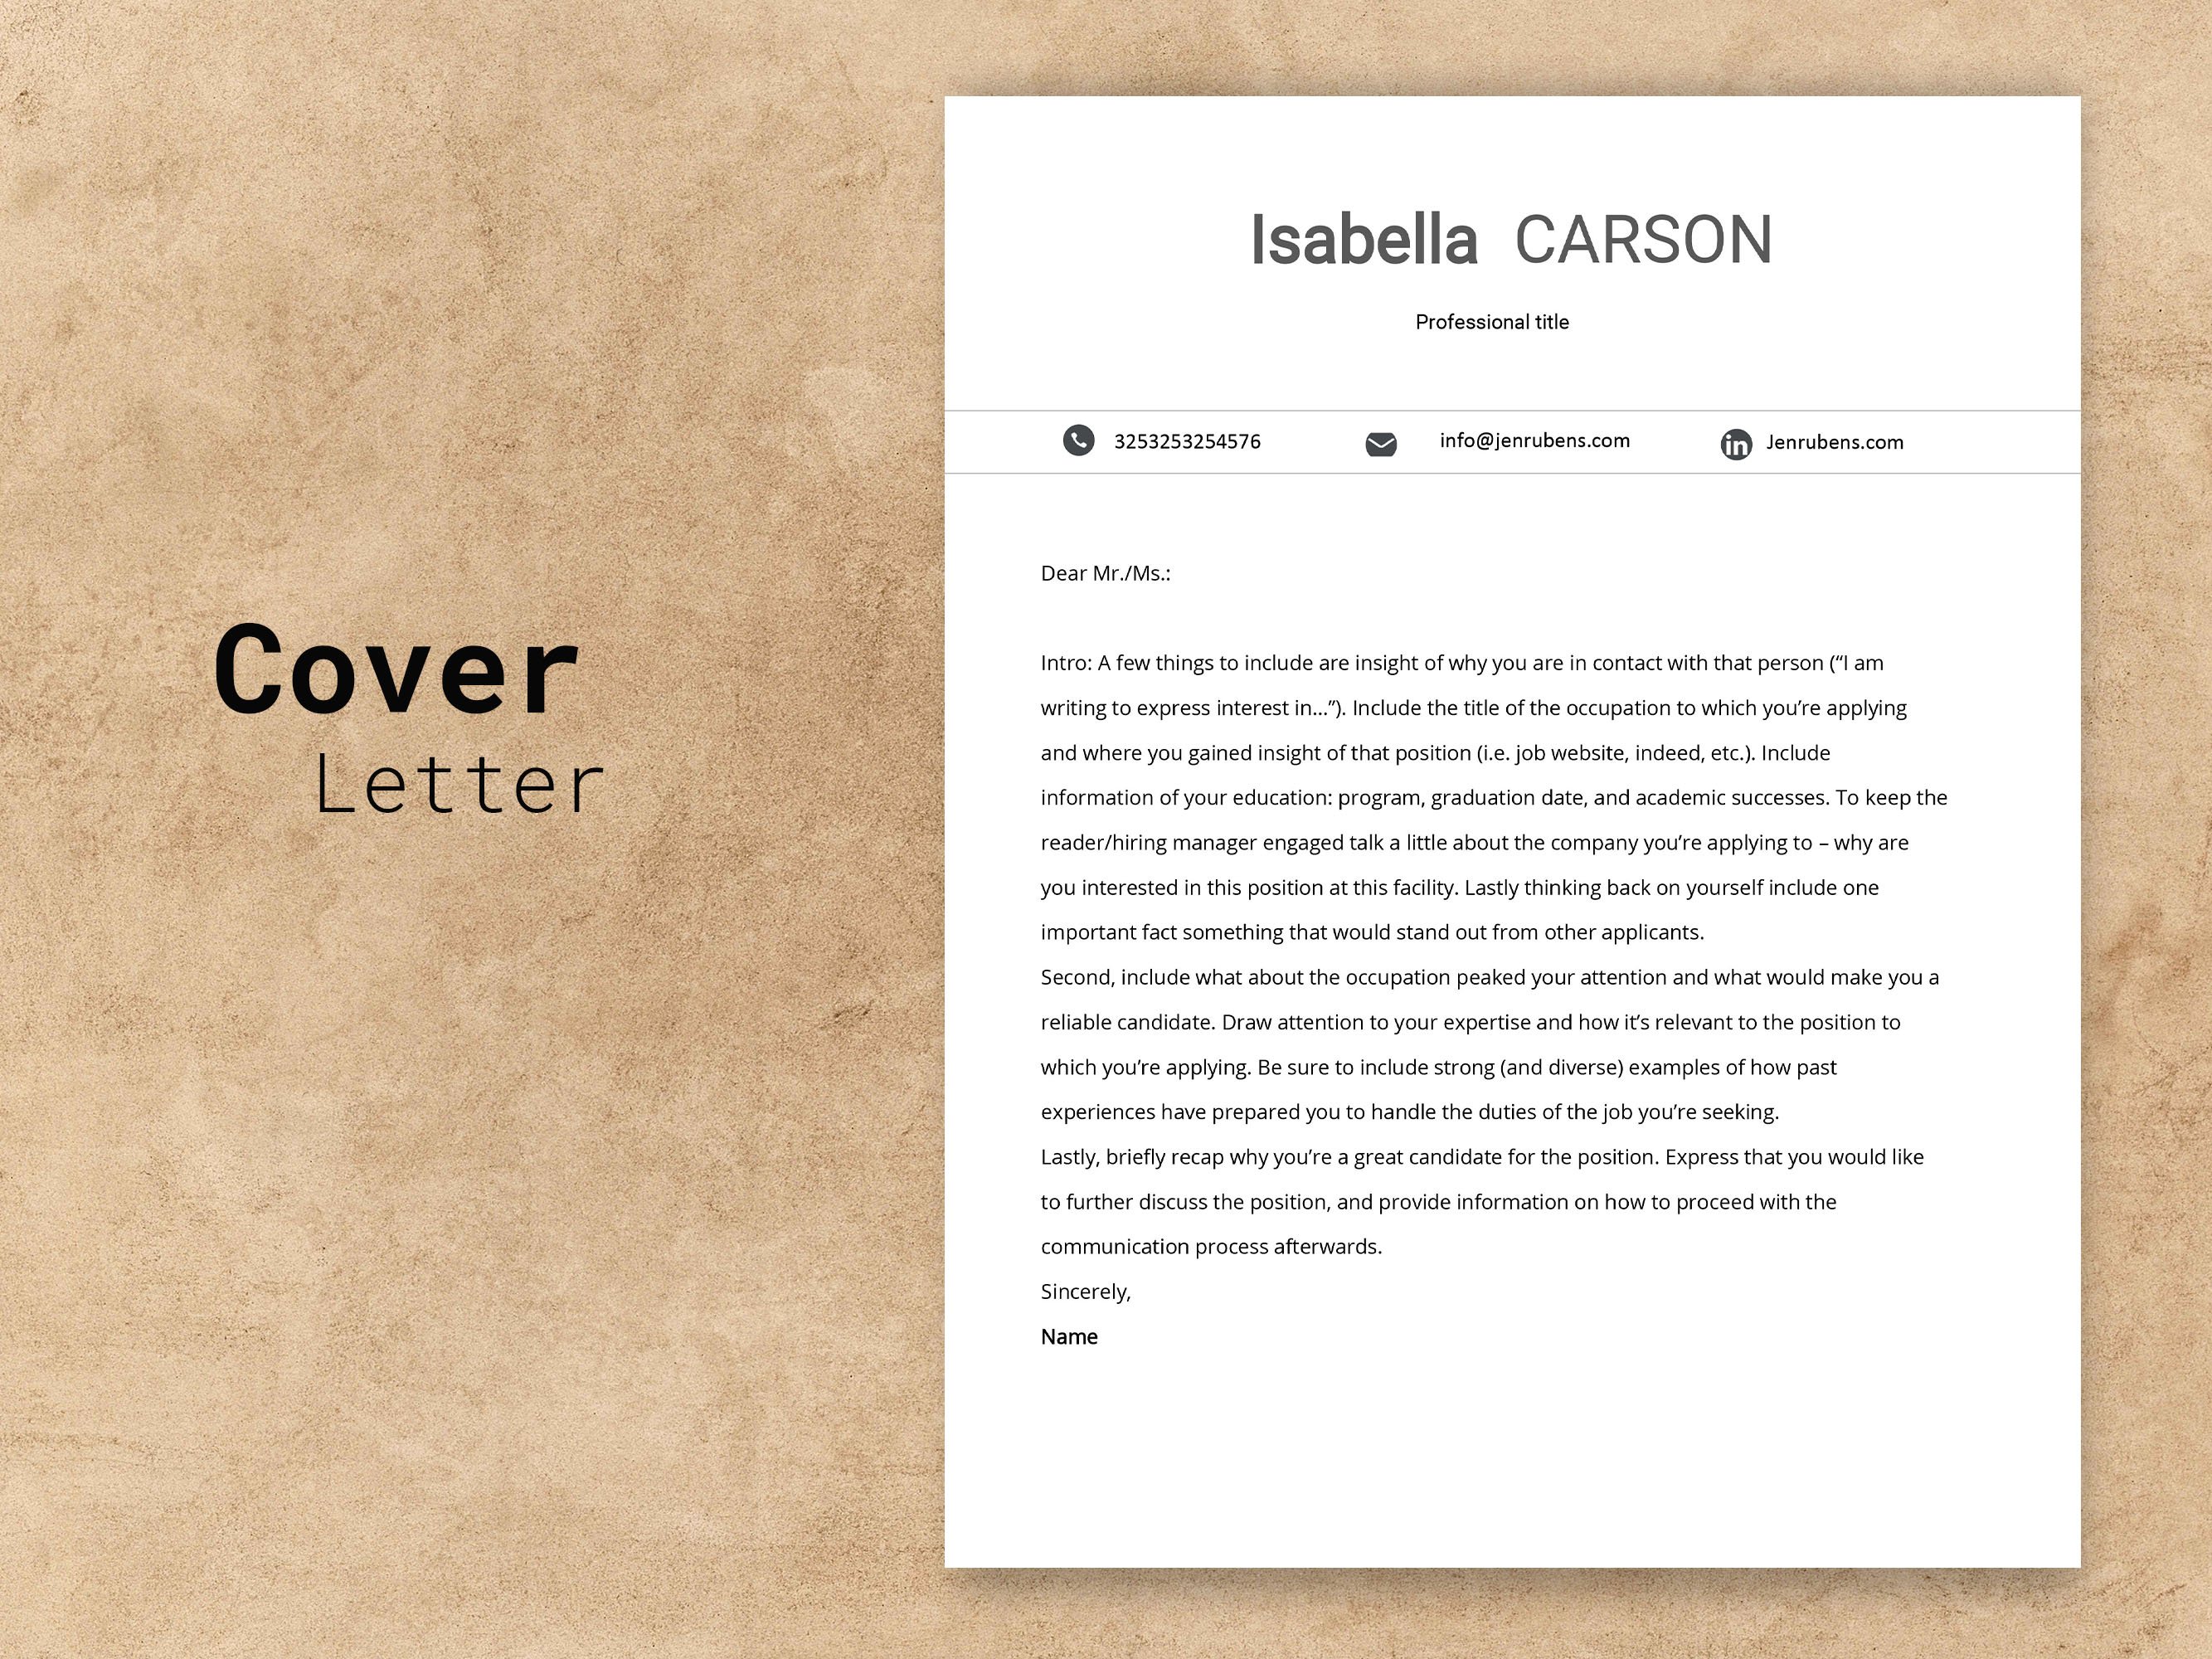 Cover letter is displayed on a piece of paper.